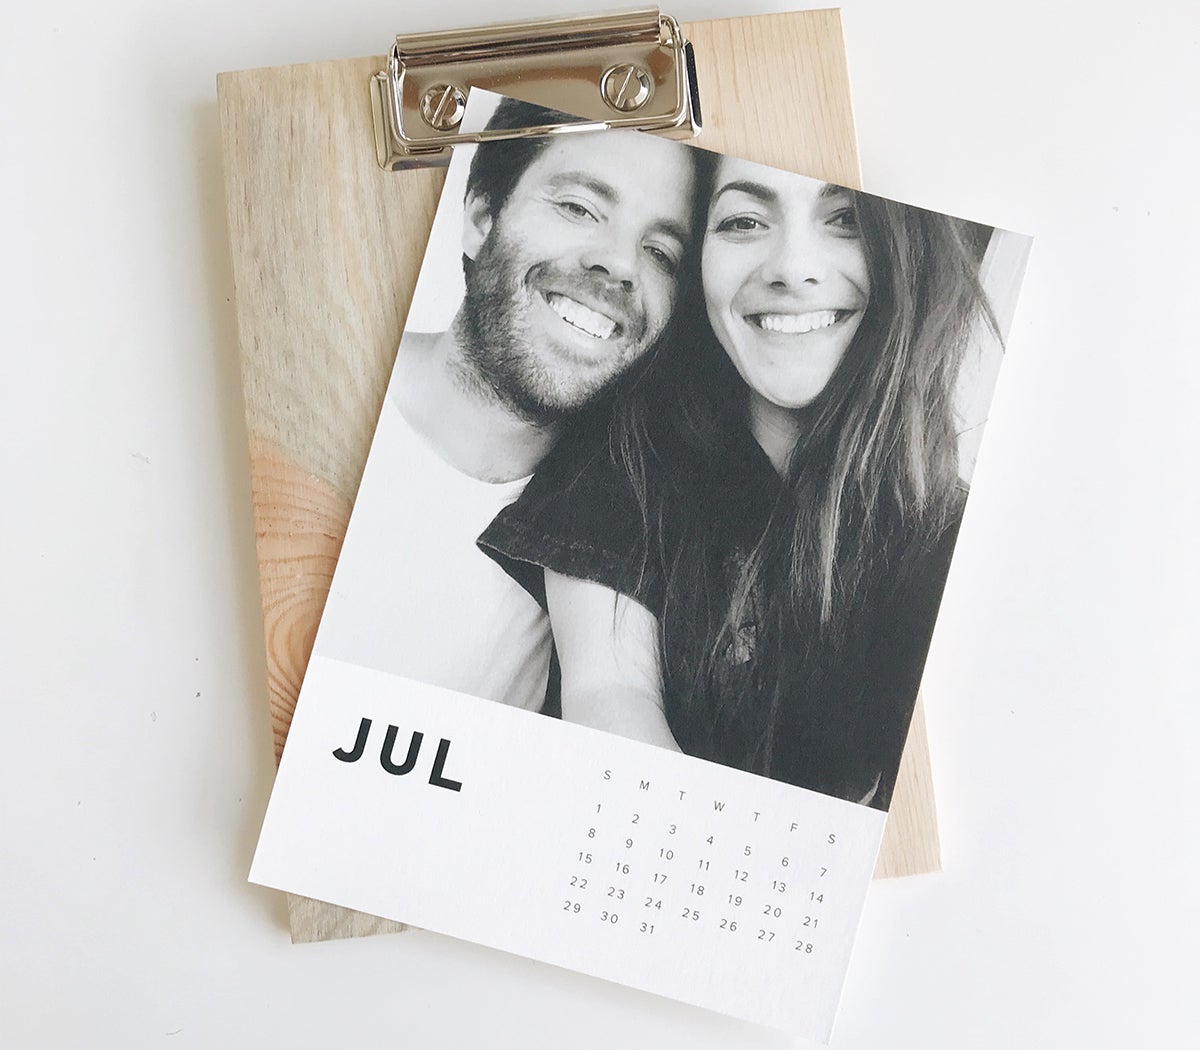 Photo by @relevantraw of Artifact Uprising wood calendar featuring print of couple